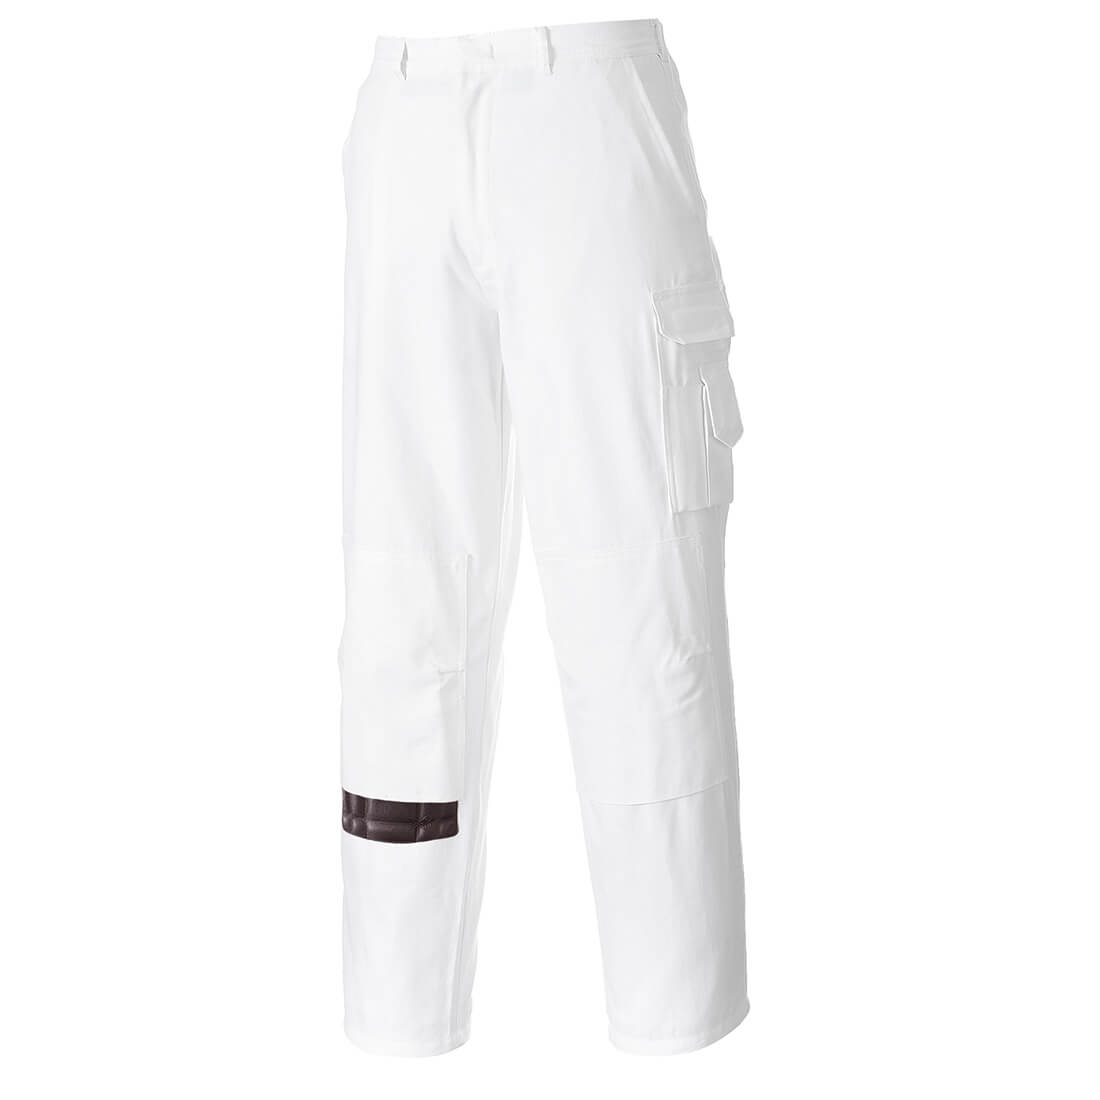 Image of Portwest Painters Trousers White S 31"